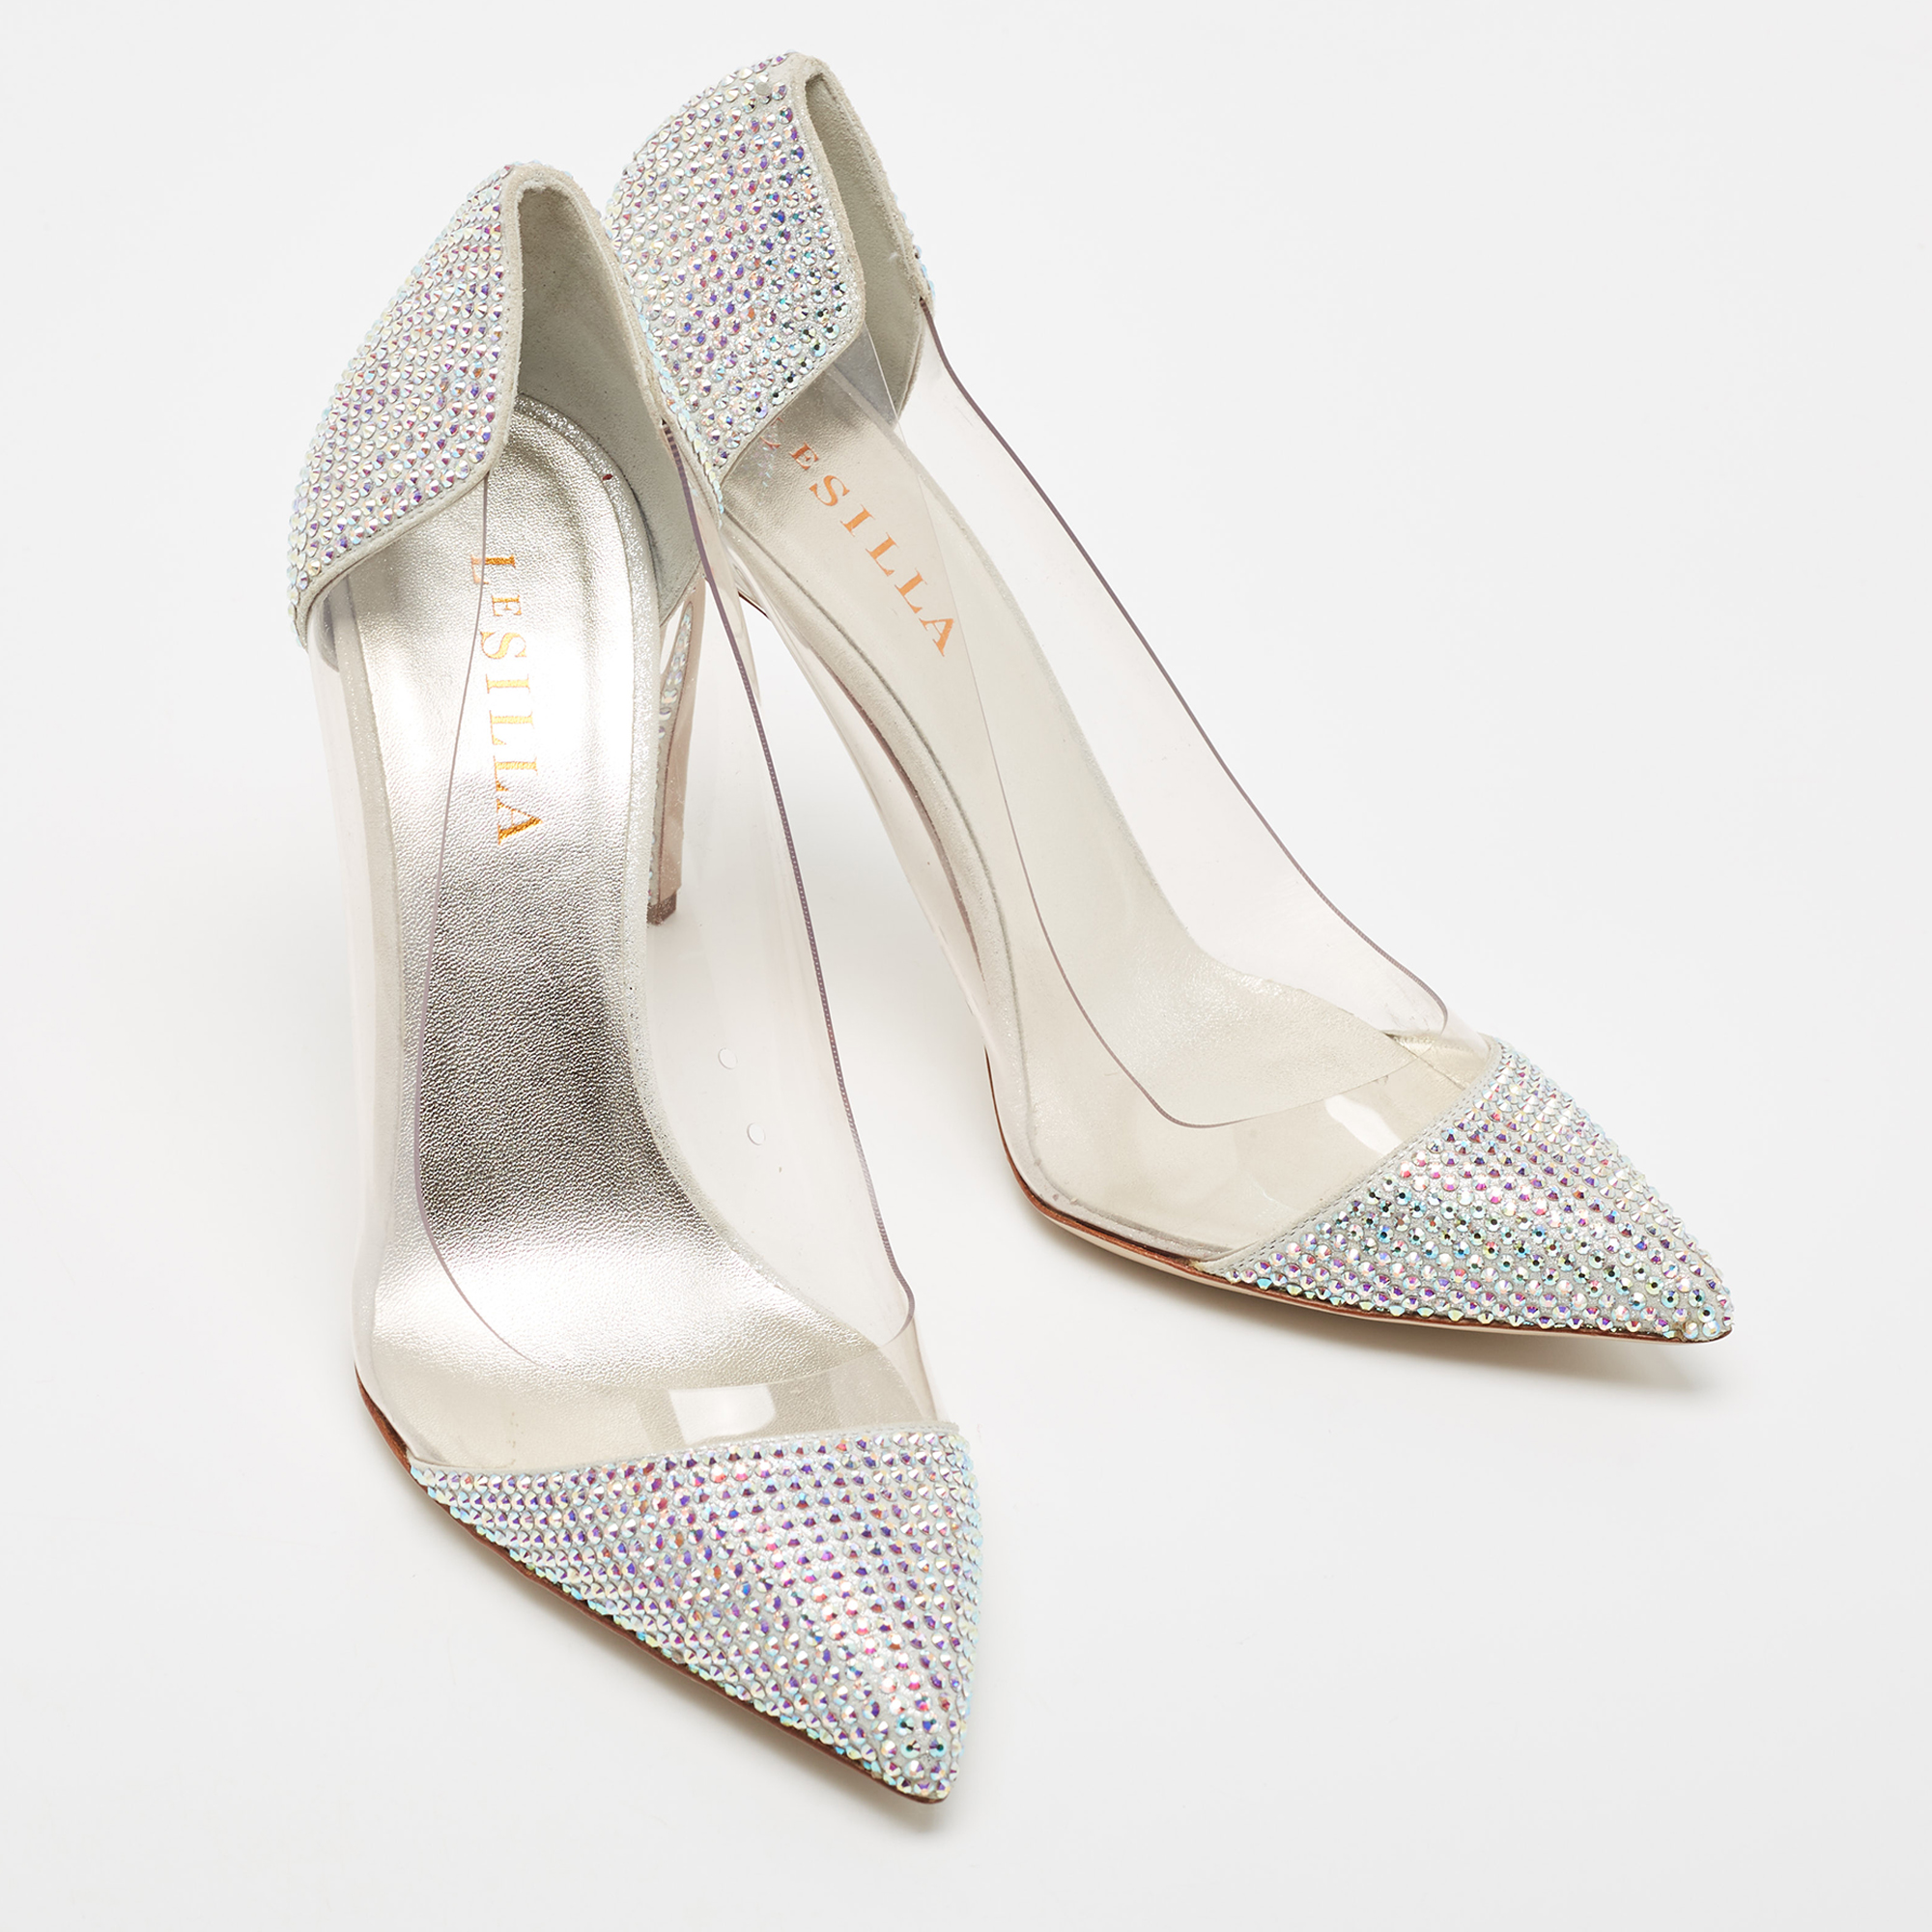 Le Silla Silver Suede And PVC Crystal Embellished Pumps Size 39.5